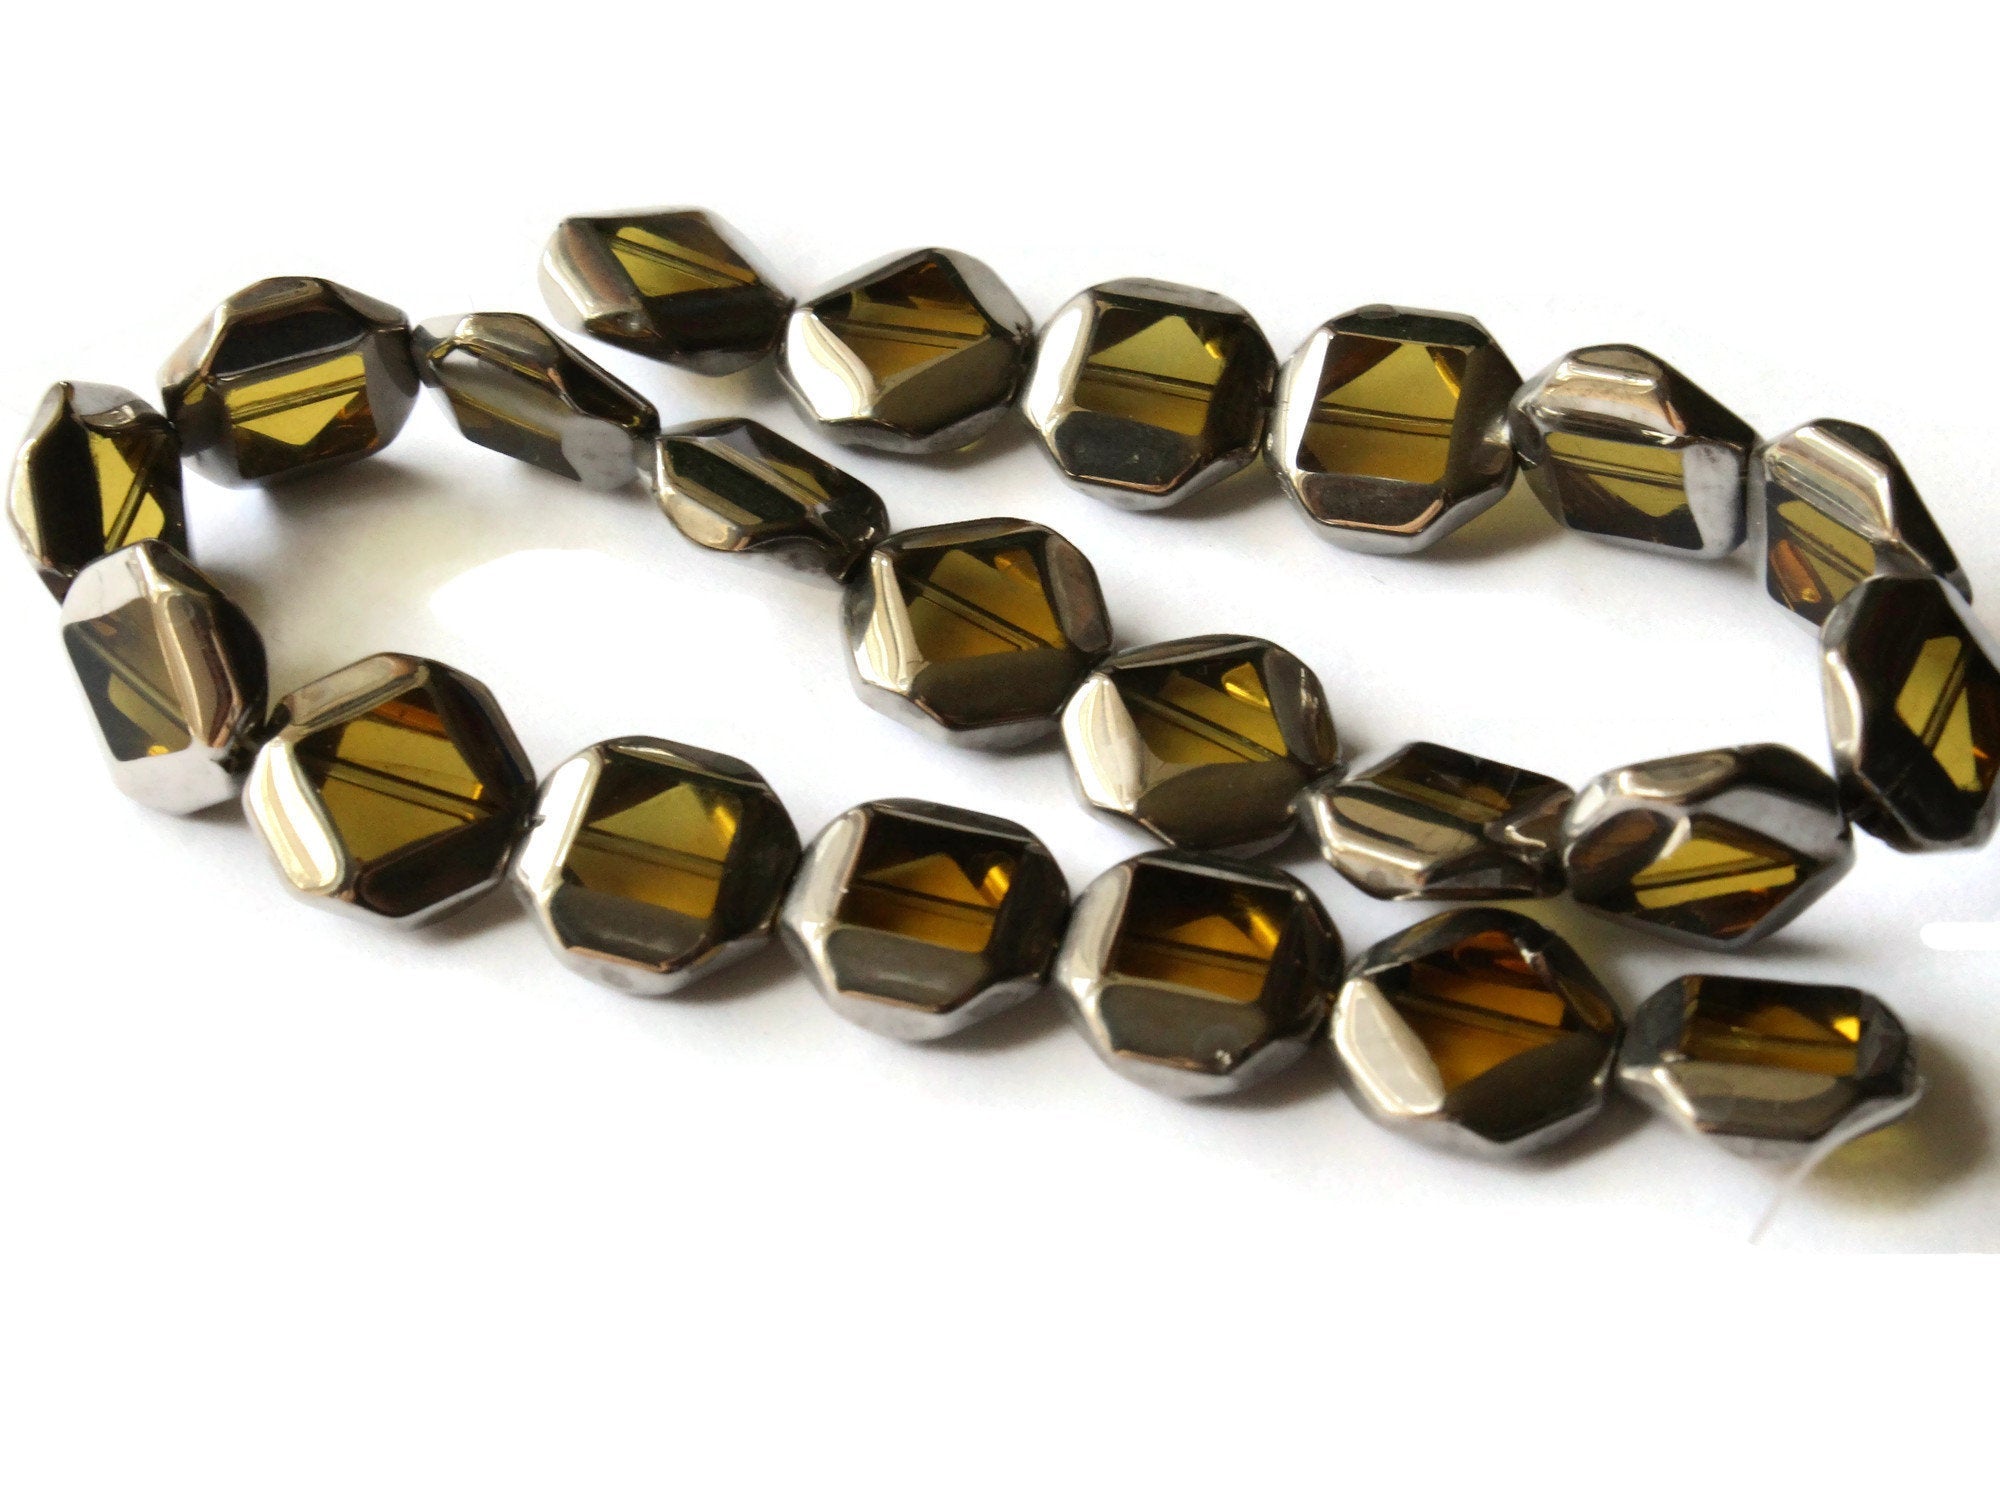 22 14mm Silver Rimmed Glass Beads Yellow Octagon Window Beads by Smileyboy | Michaels